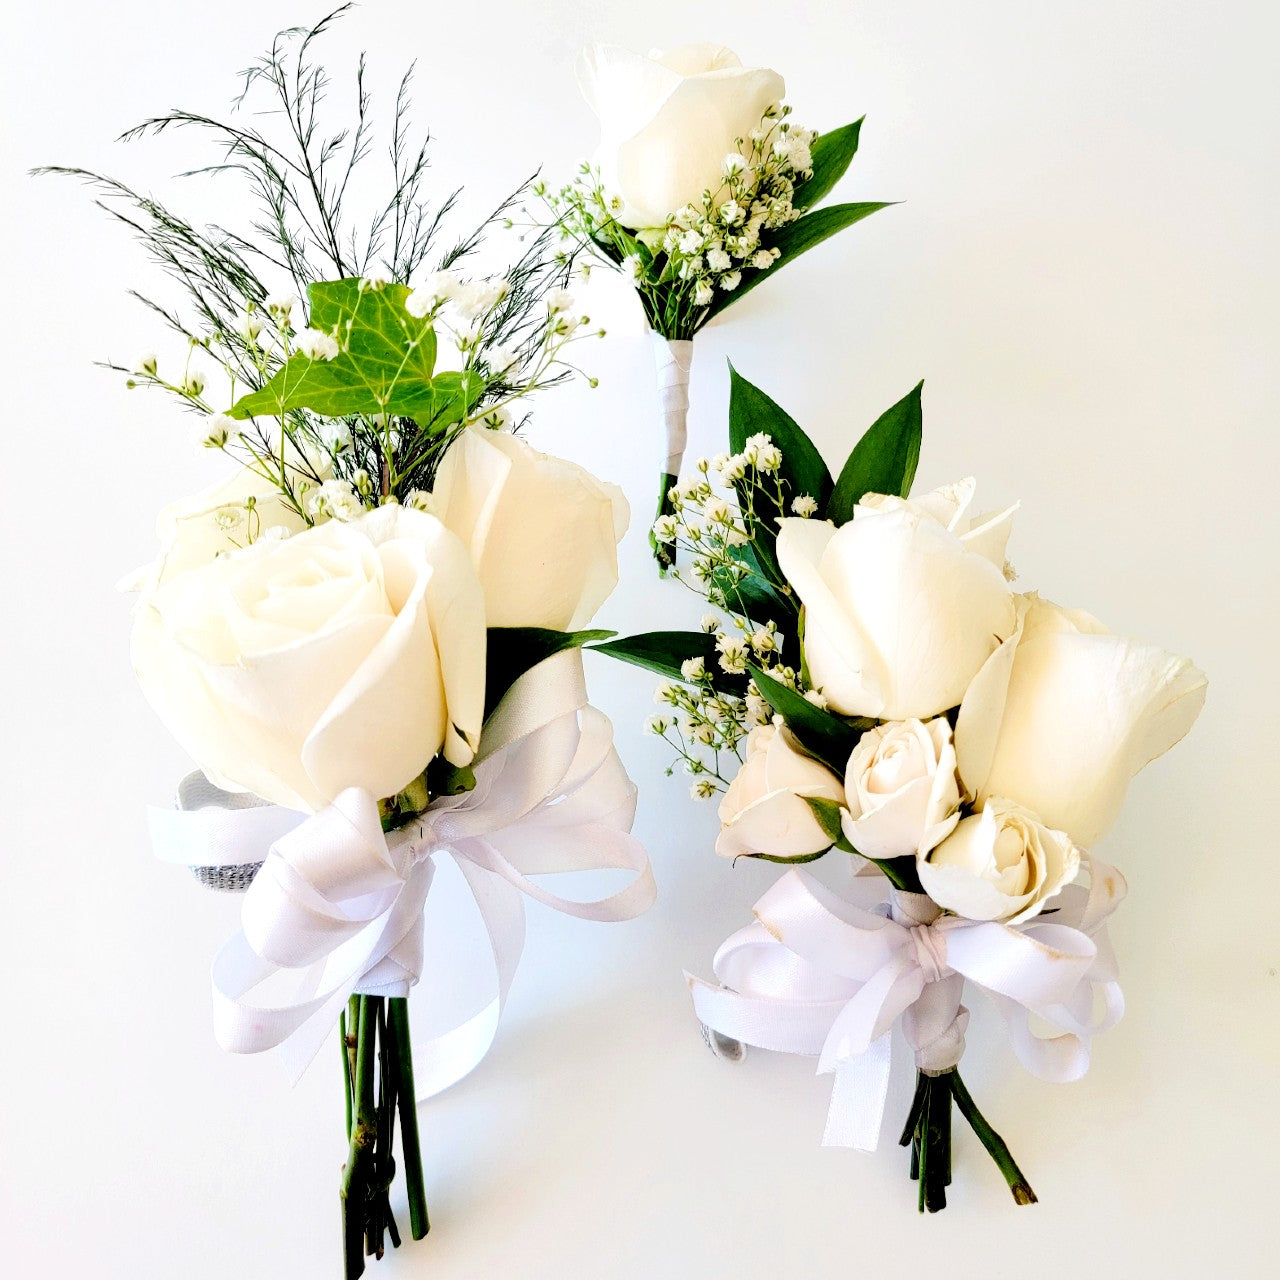 Triple Rose Corsages and Boutonnieres Combo – Flowers For Fundraising